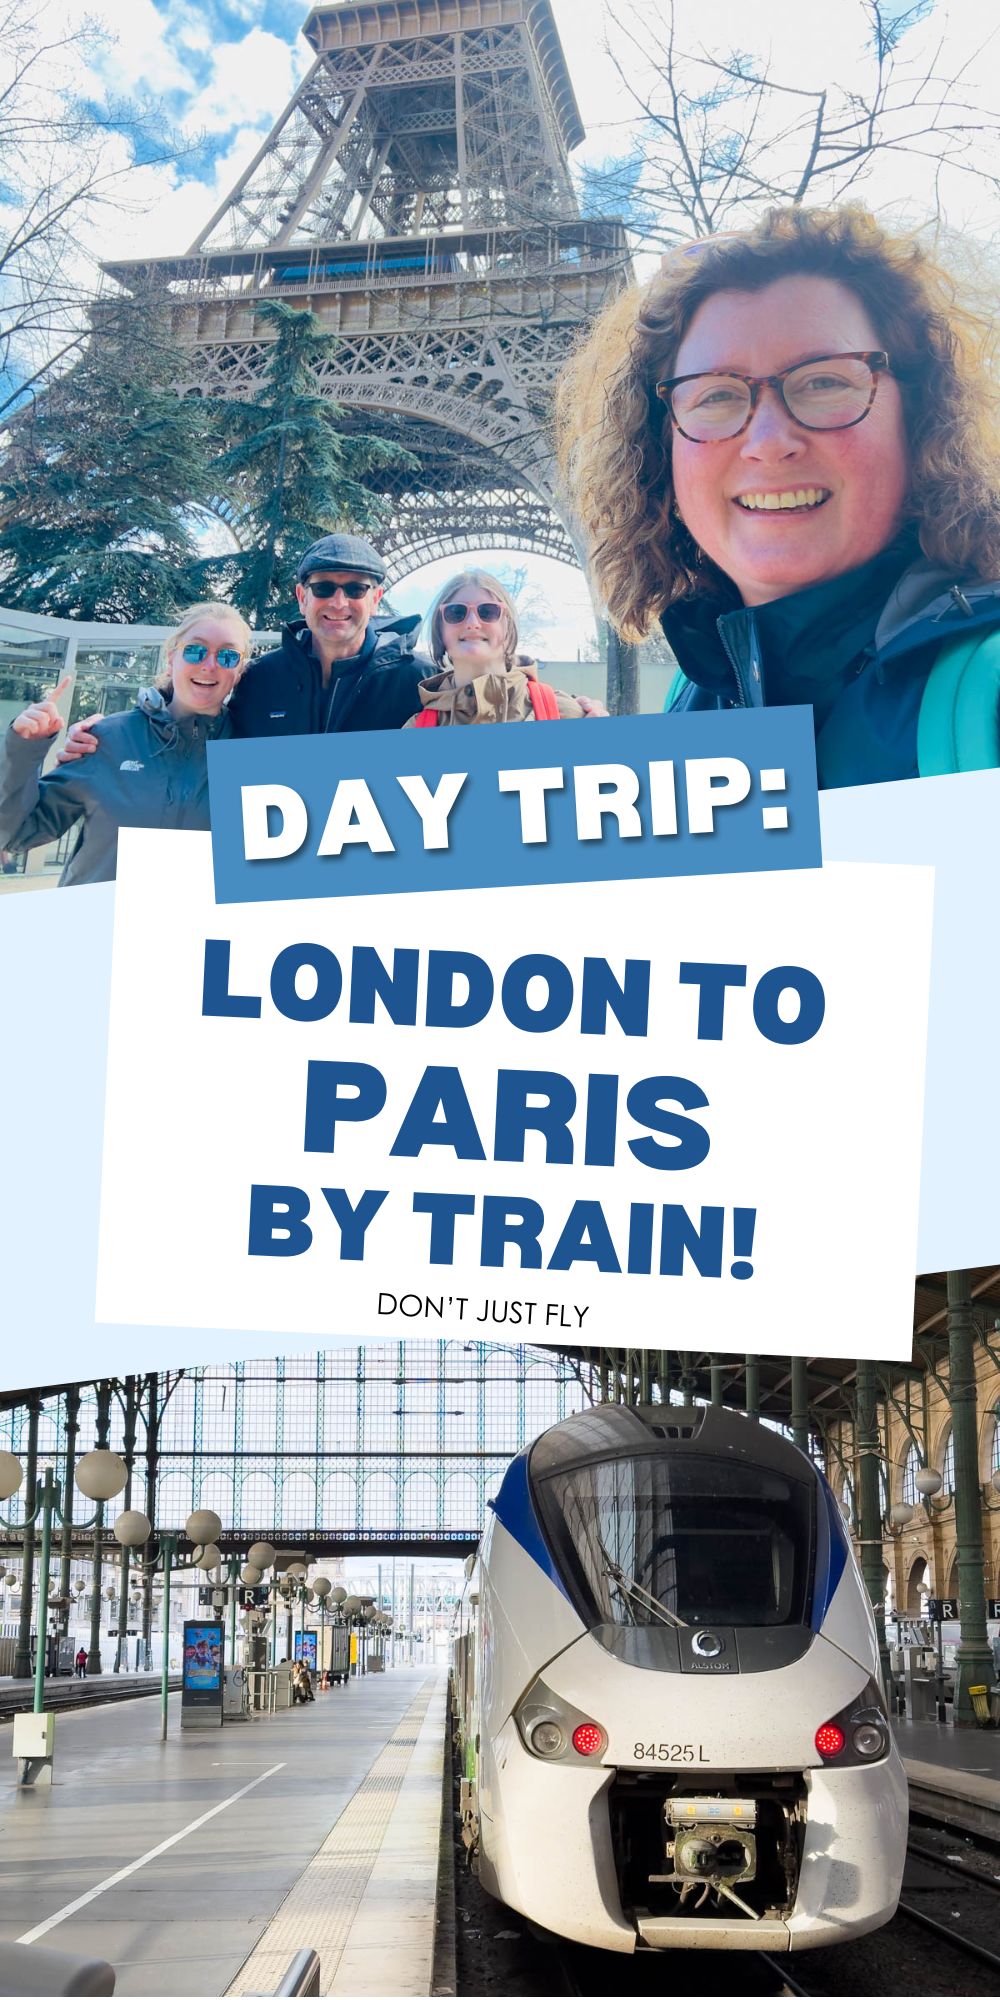 The photo collage shows a family by the eiffel tower next to a photo of the commuter train from London.